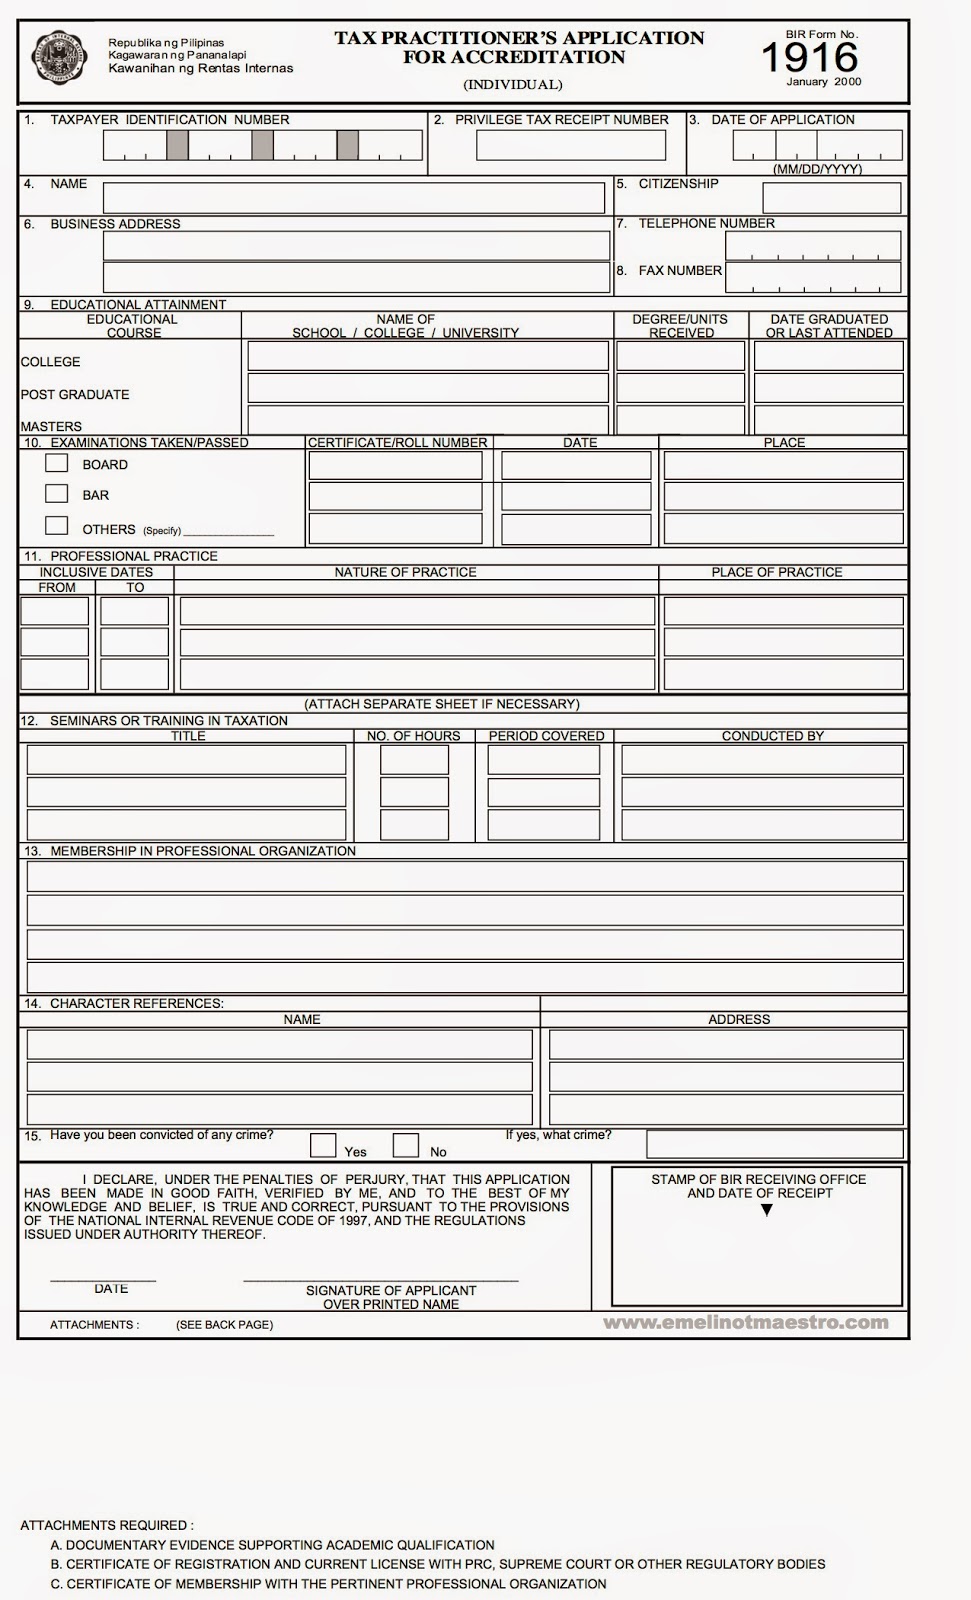 bir form 0605 - philippin news collections